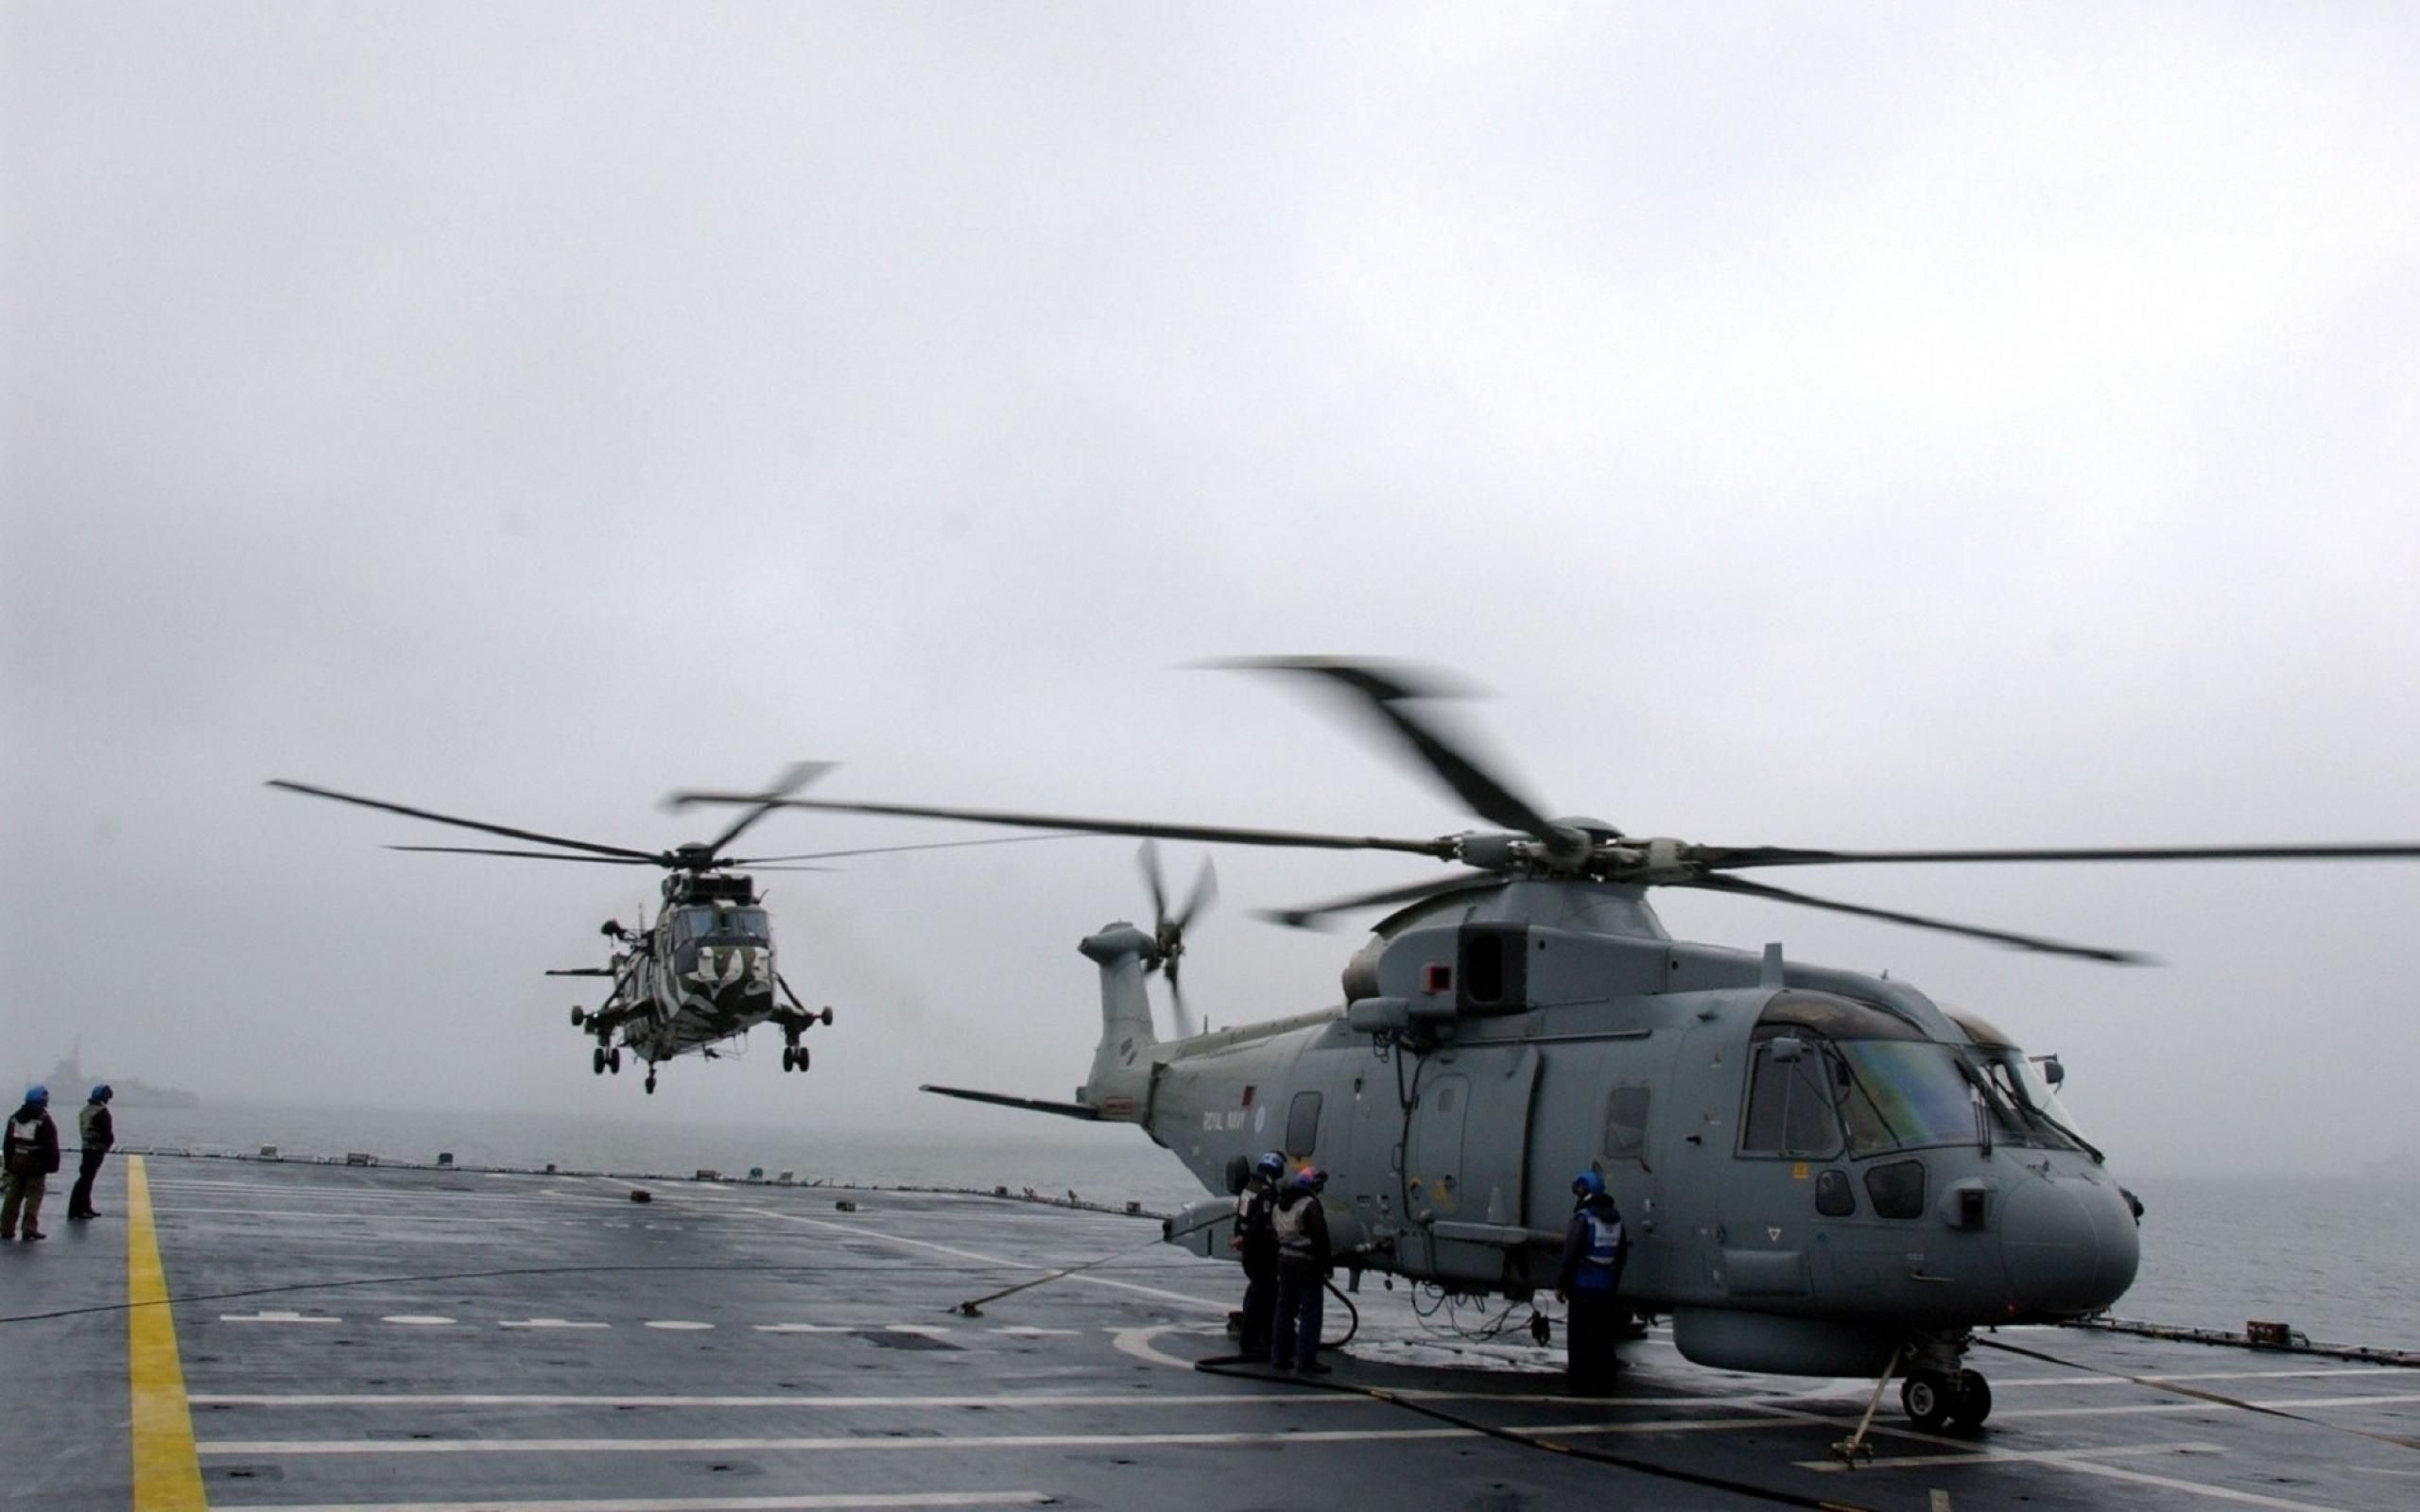 Aircraft Carrier Helicopter Landings. Helicopter, Military wallpaper, Military helicopter